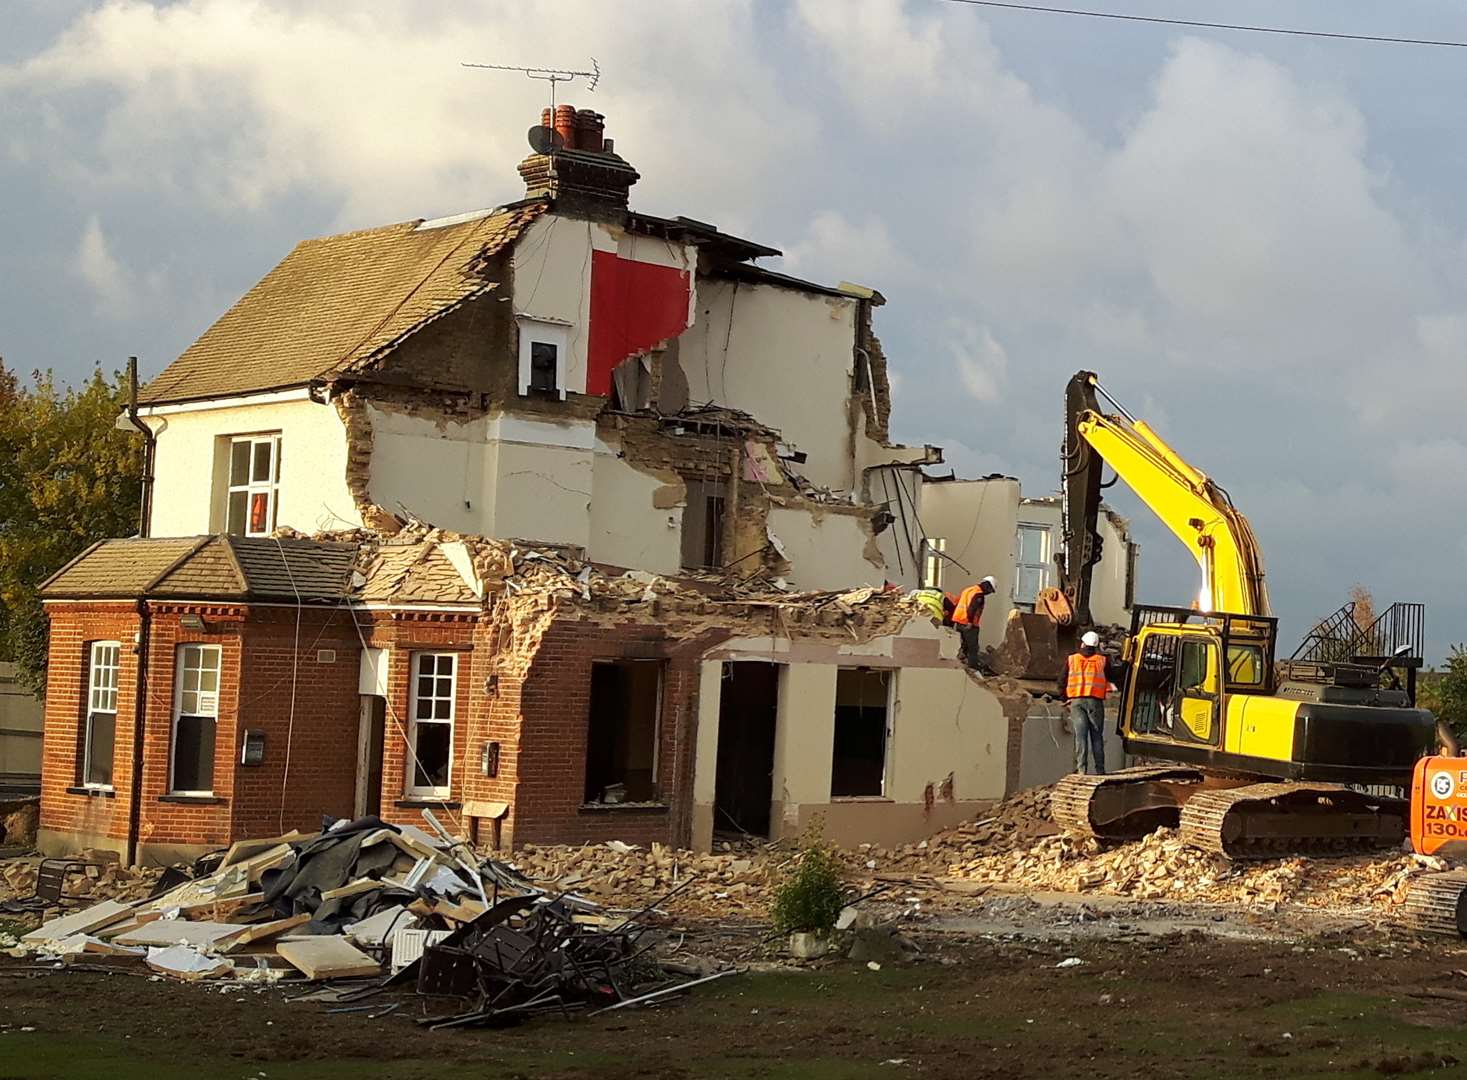 Popular pub pulled down 'by mistake', planning boss admits